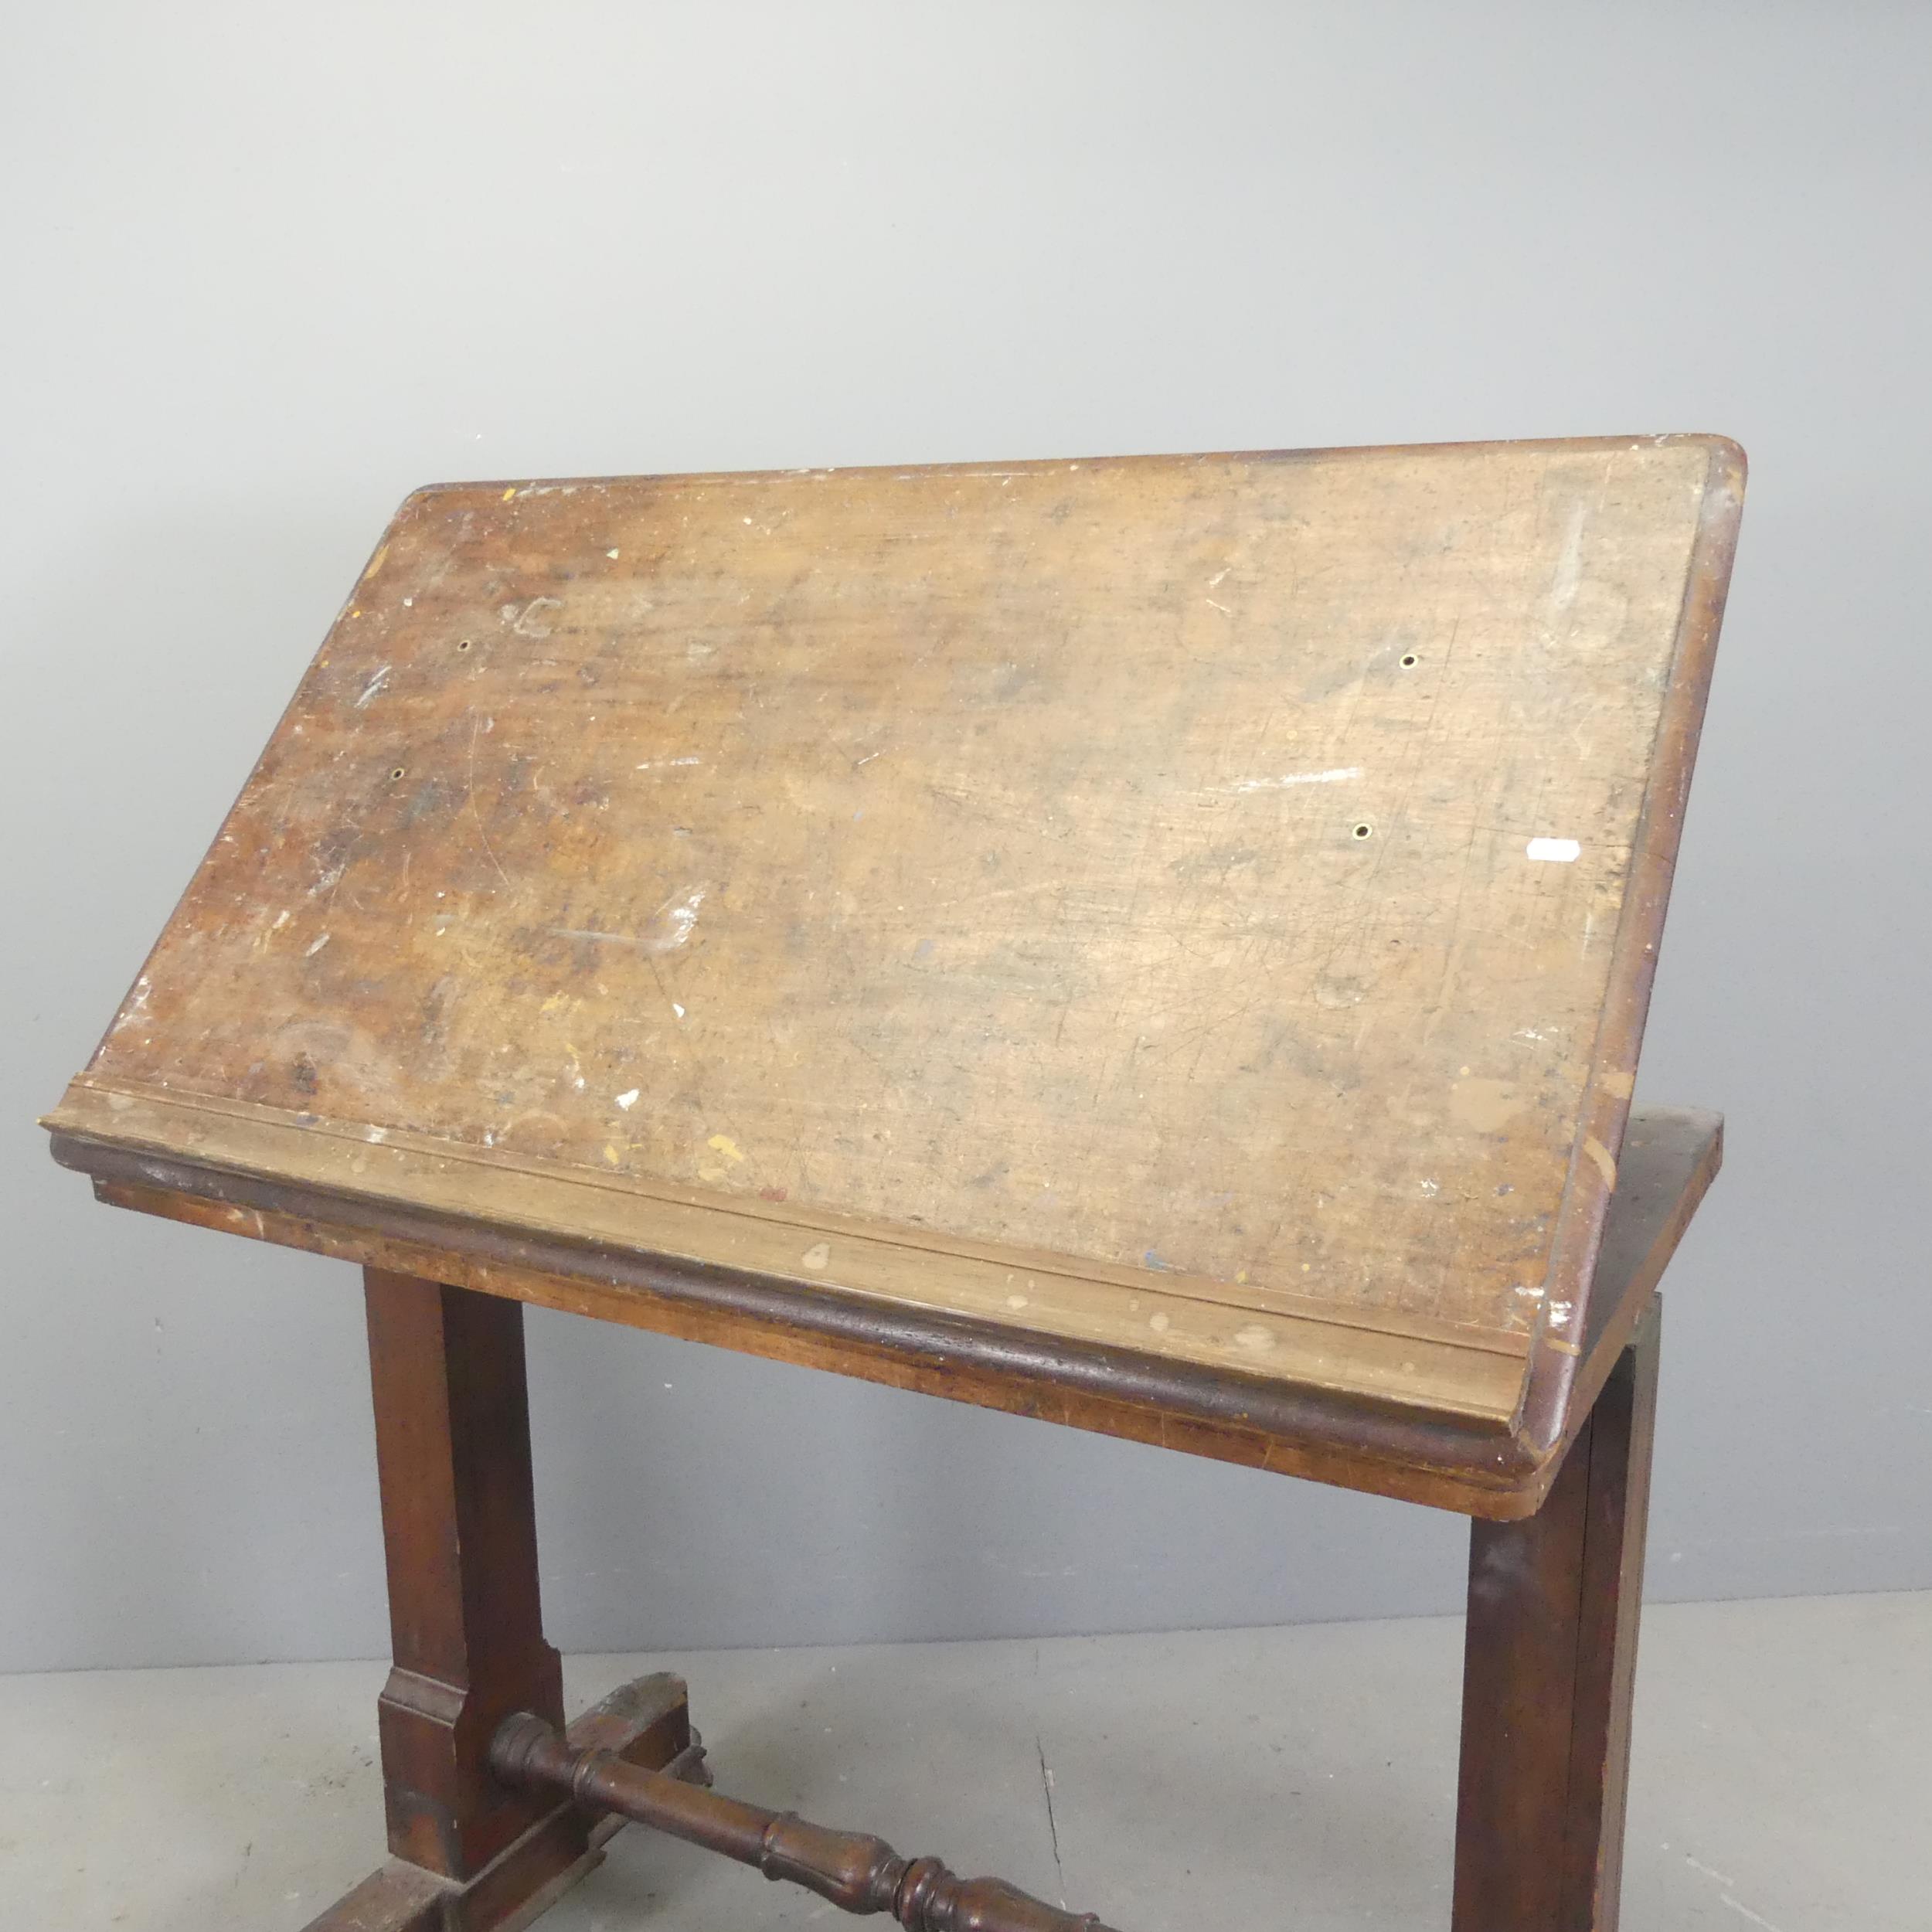 A 19th century oak adjustable Architect's table, with lifting top and adjustable stand. - Image 2 of 2